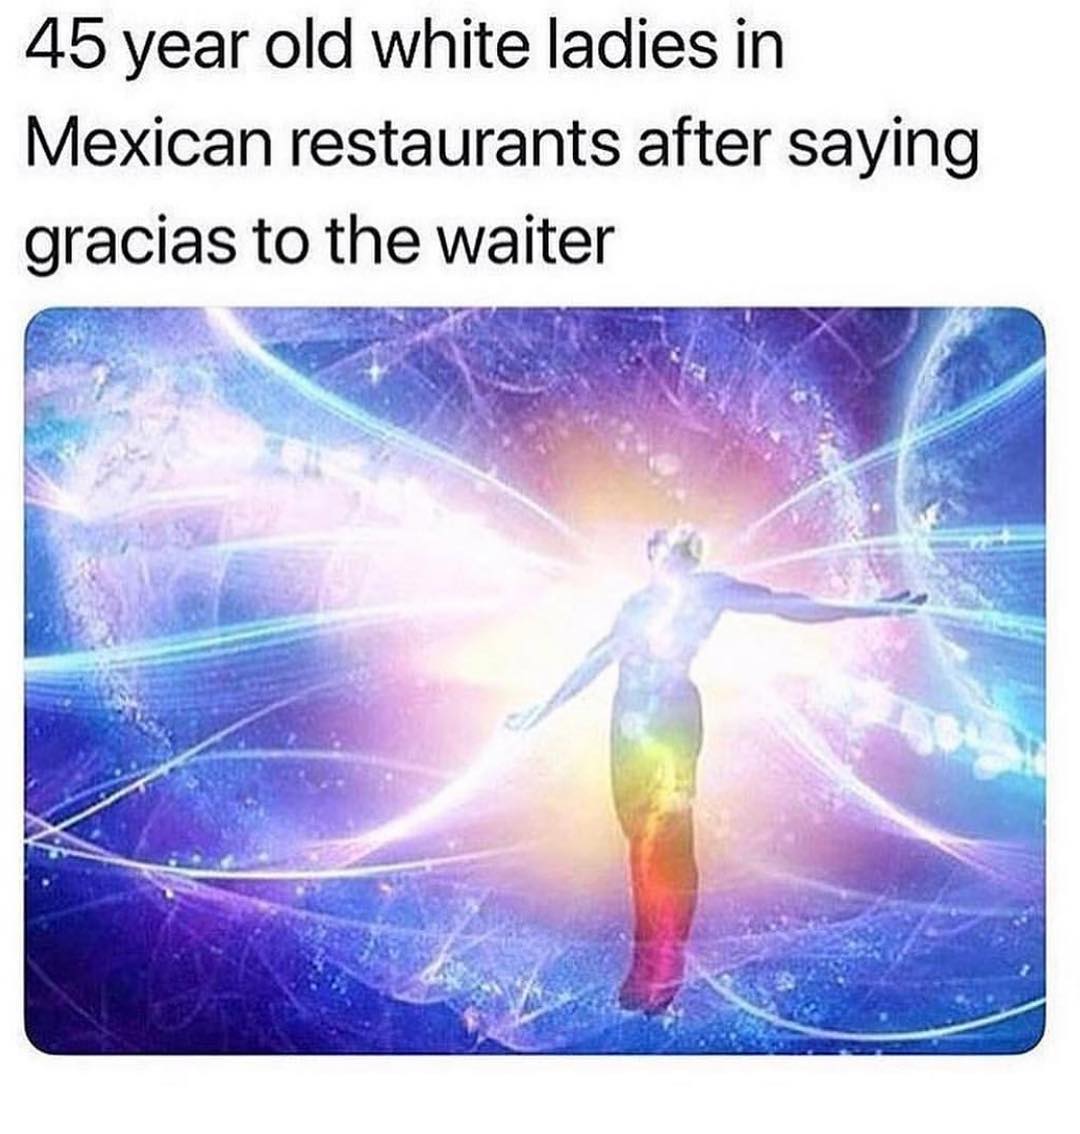 45 year old white ladies in Mexican restaurants after saying gracias to the waiter.